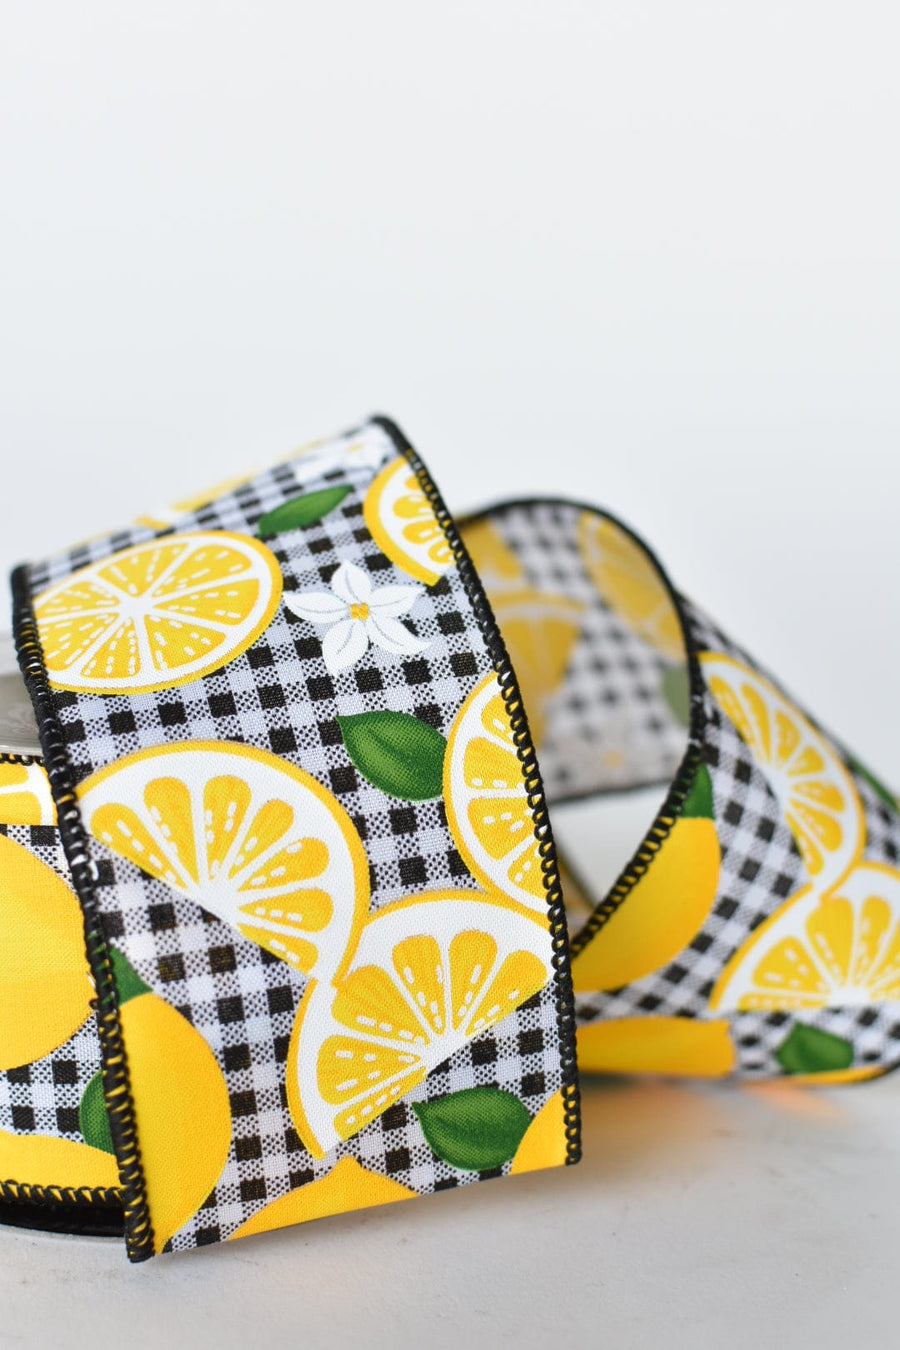 2.5" x 10yd Black and White Check with Lemons Wired Ribbon